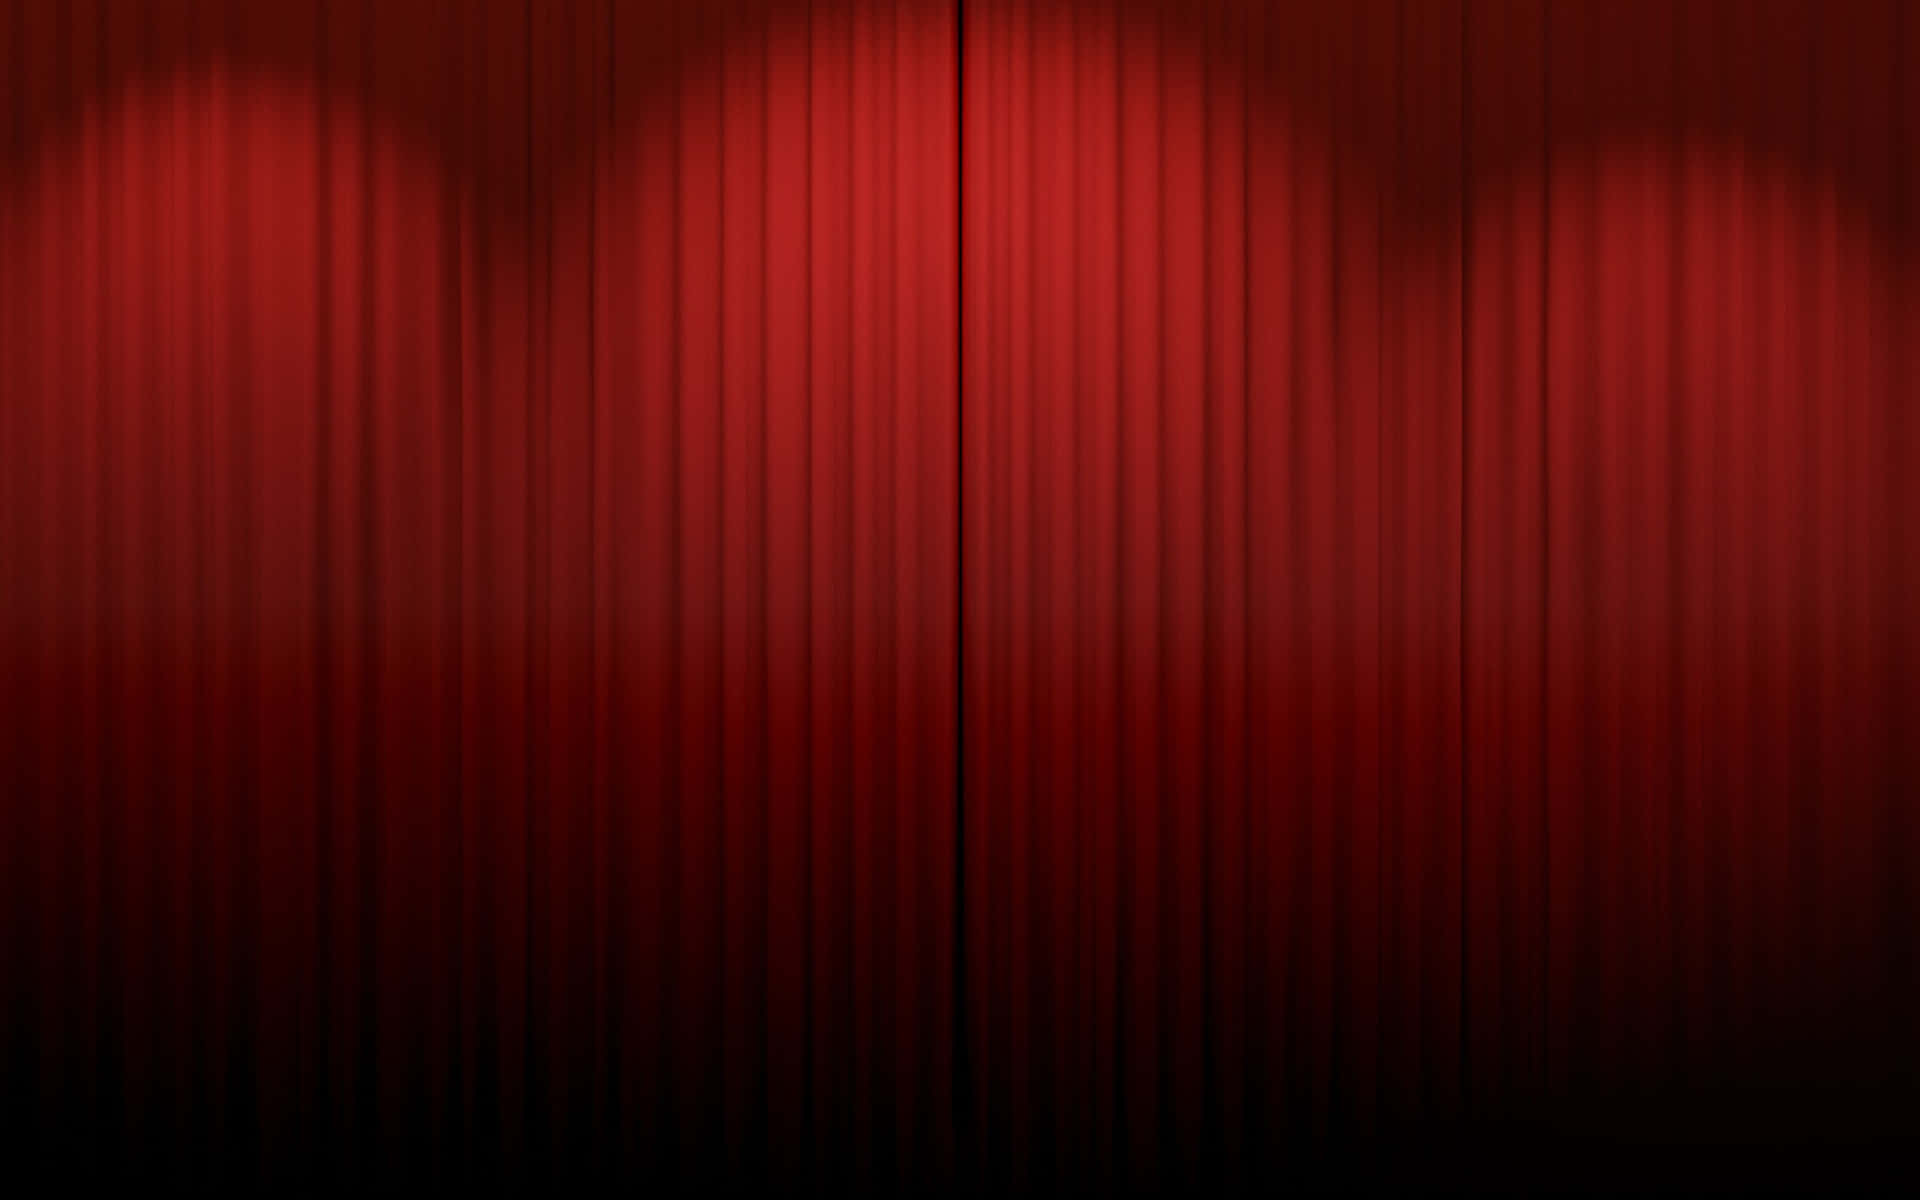 Welcome to the Red Curtain Spectacle